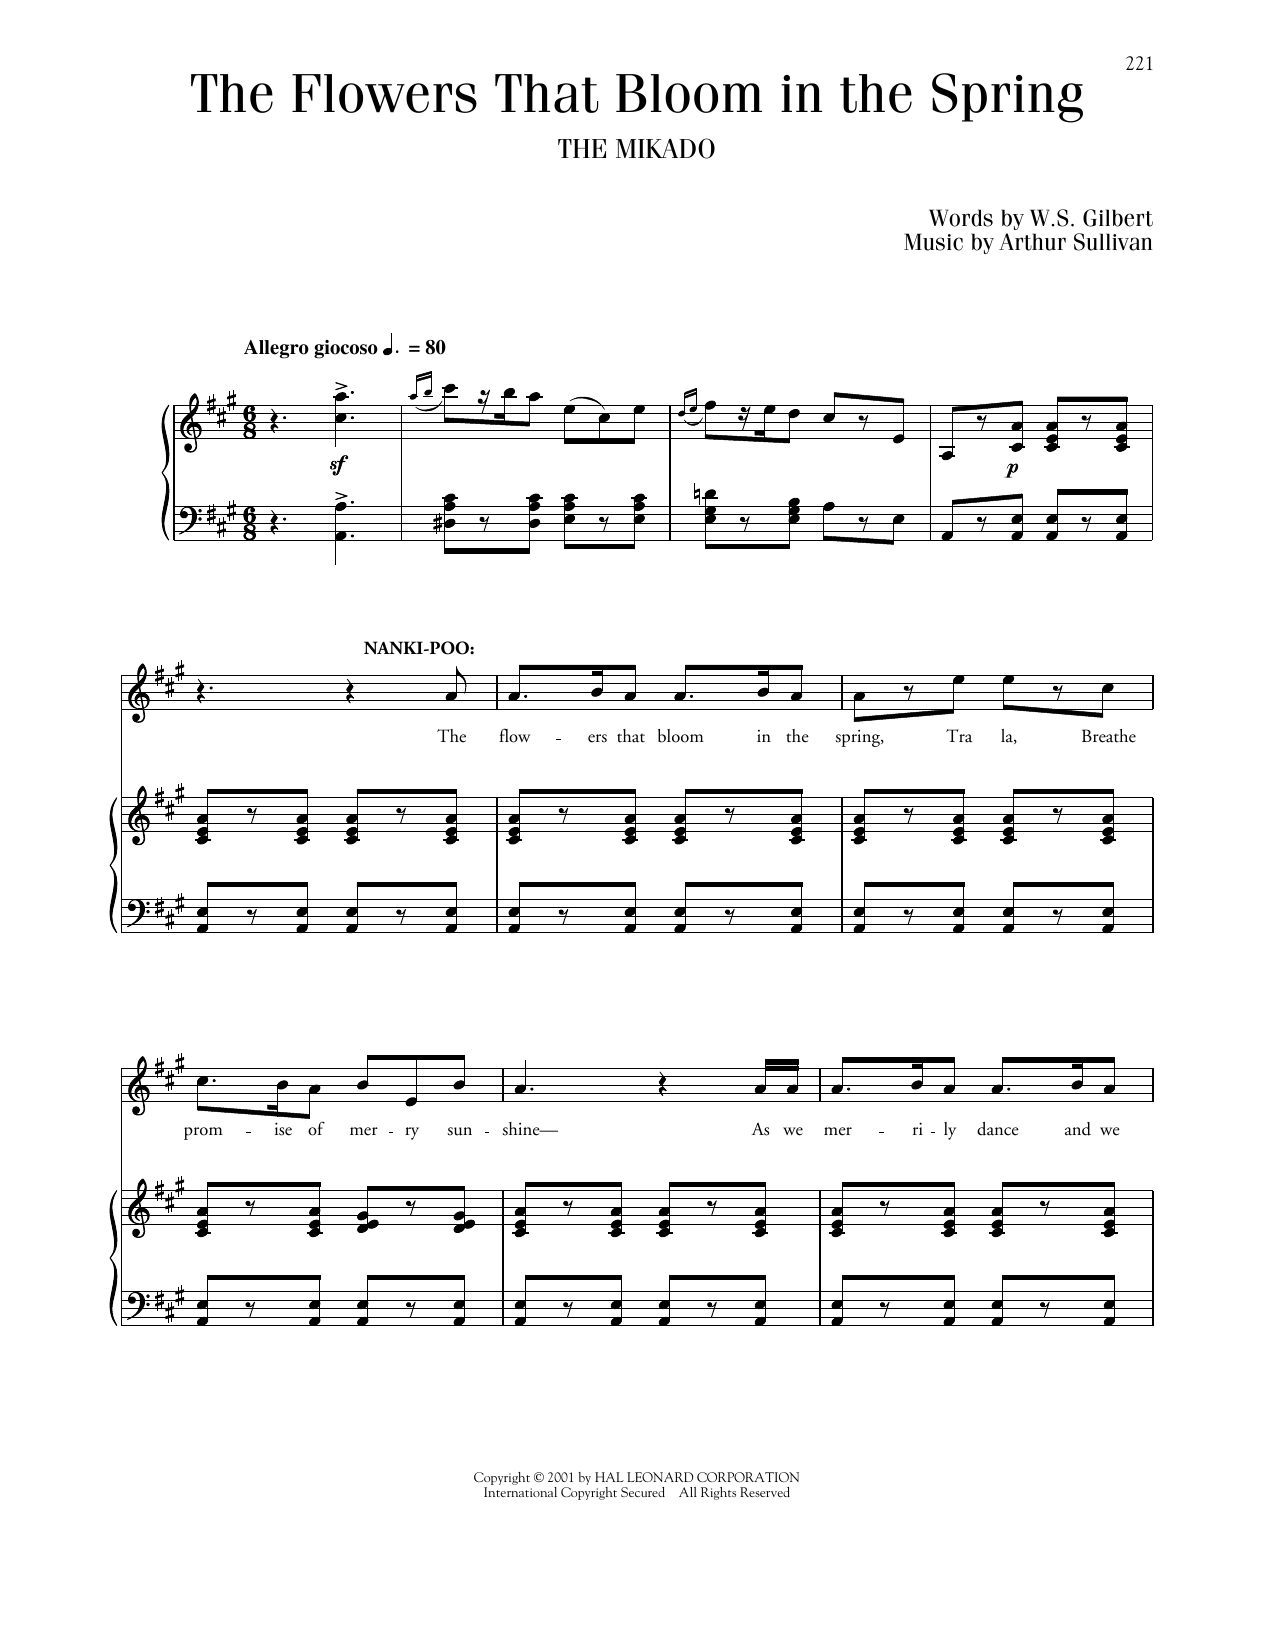 Gilbert & Sullivan The Flowers That Bloom In The Spring sheet music notes printable PDF score